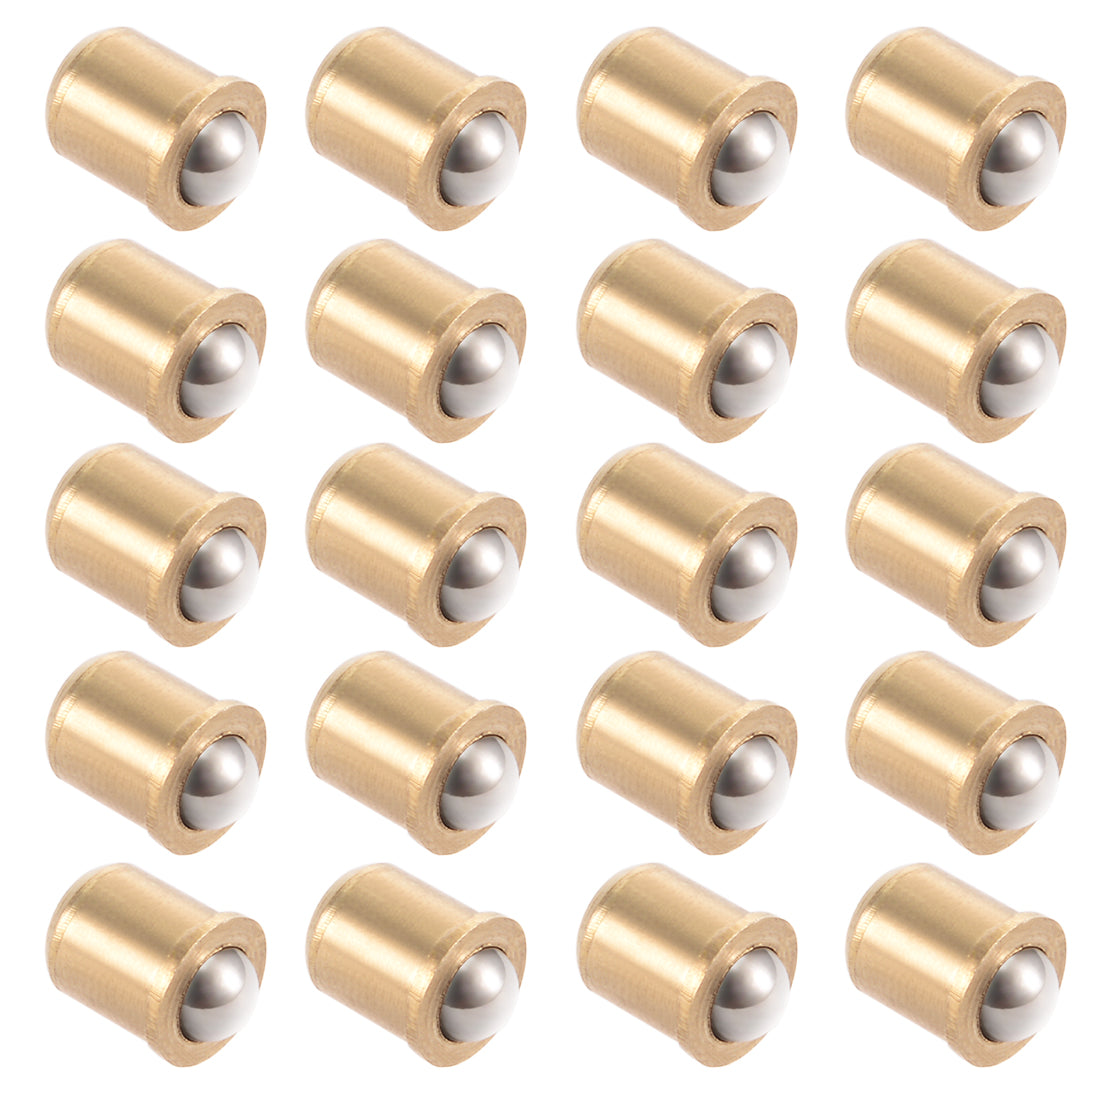 uxcell Uxcell 5mm Ball Dia Brass Electroplating Door Cabinet Ball Catch Latch Closures 20pcs